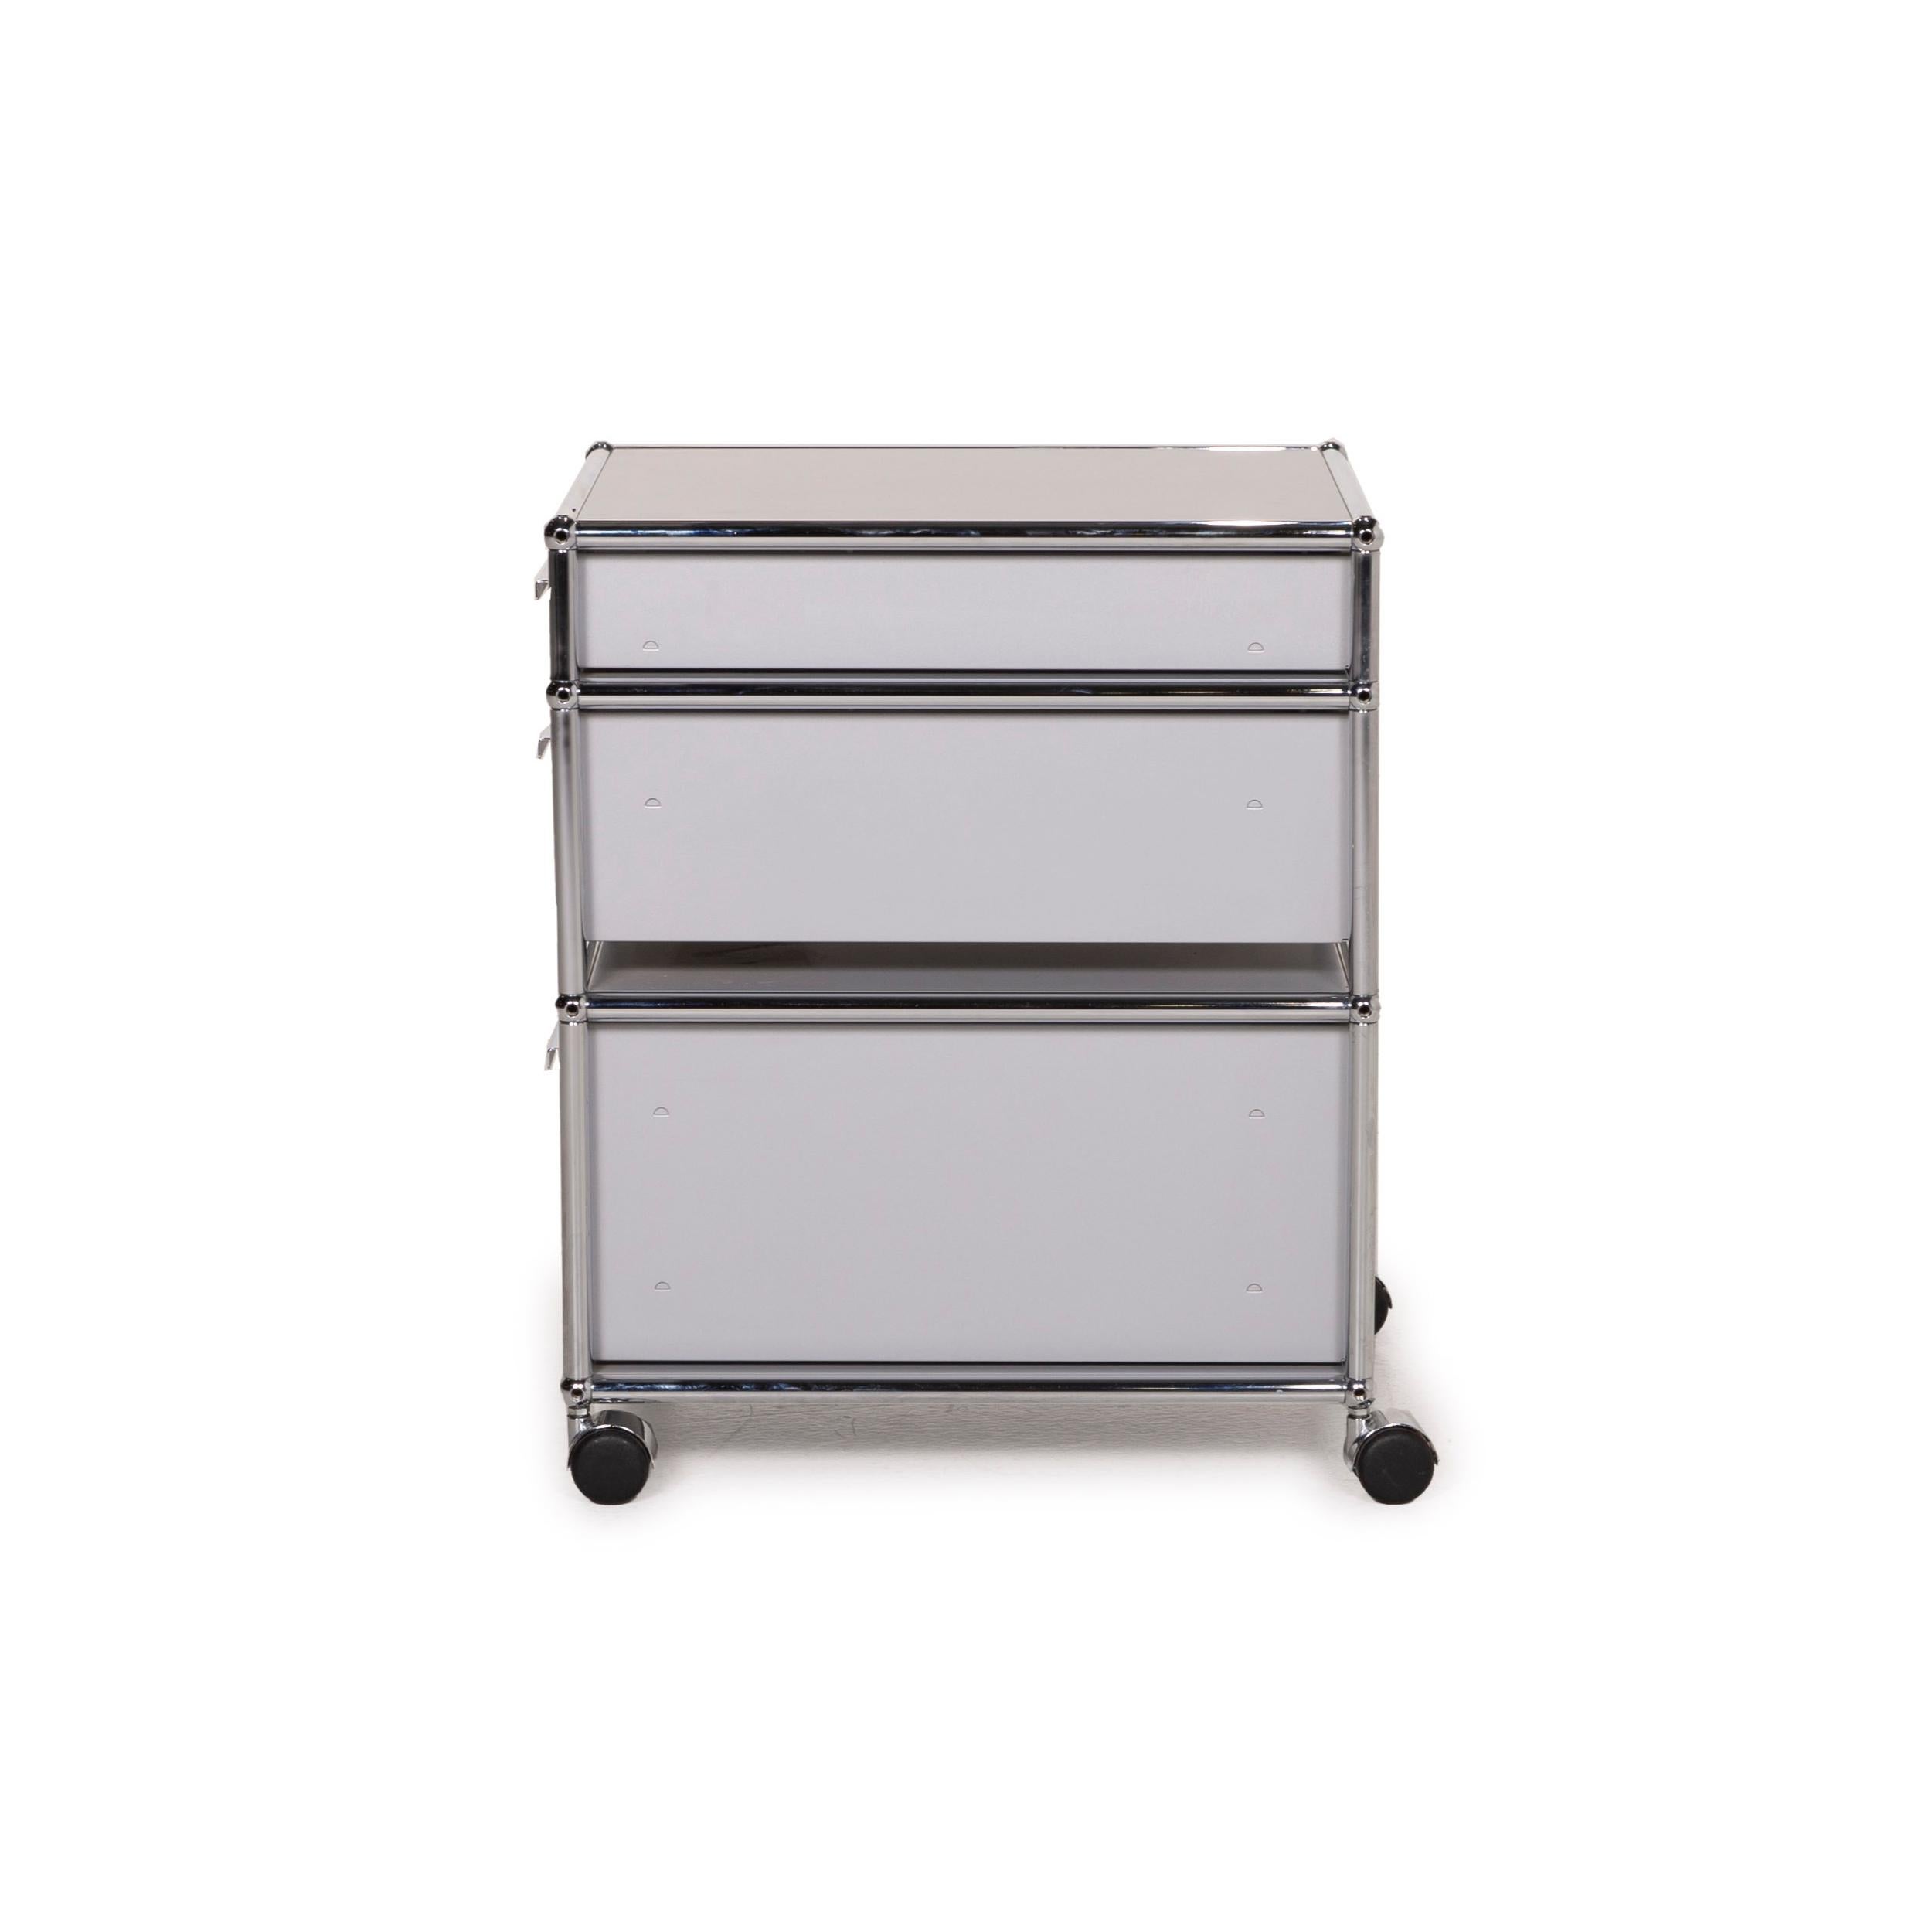 USM Haller Metal Sideboard Gray Roll Container Drawer Compartment Chrome Office 4